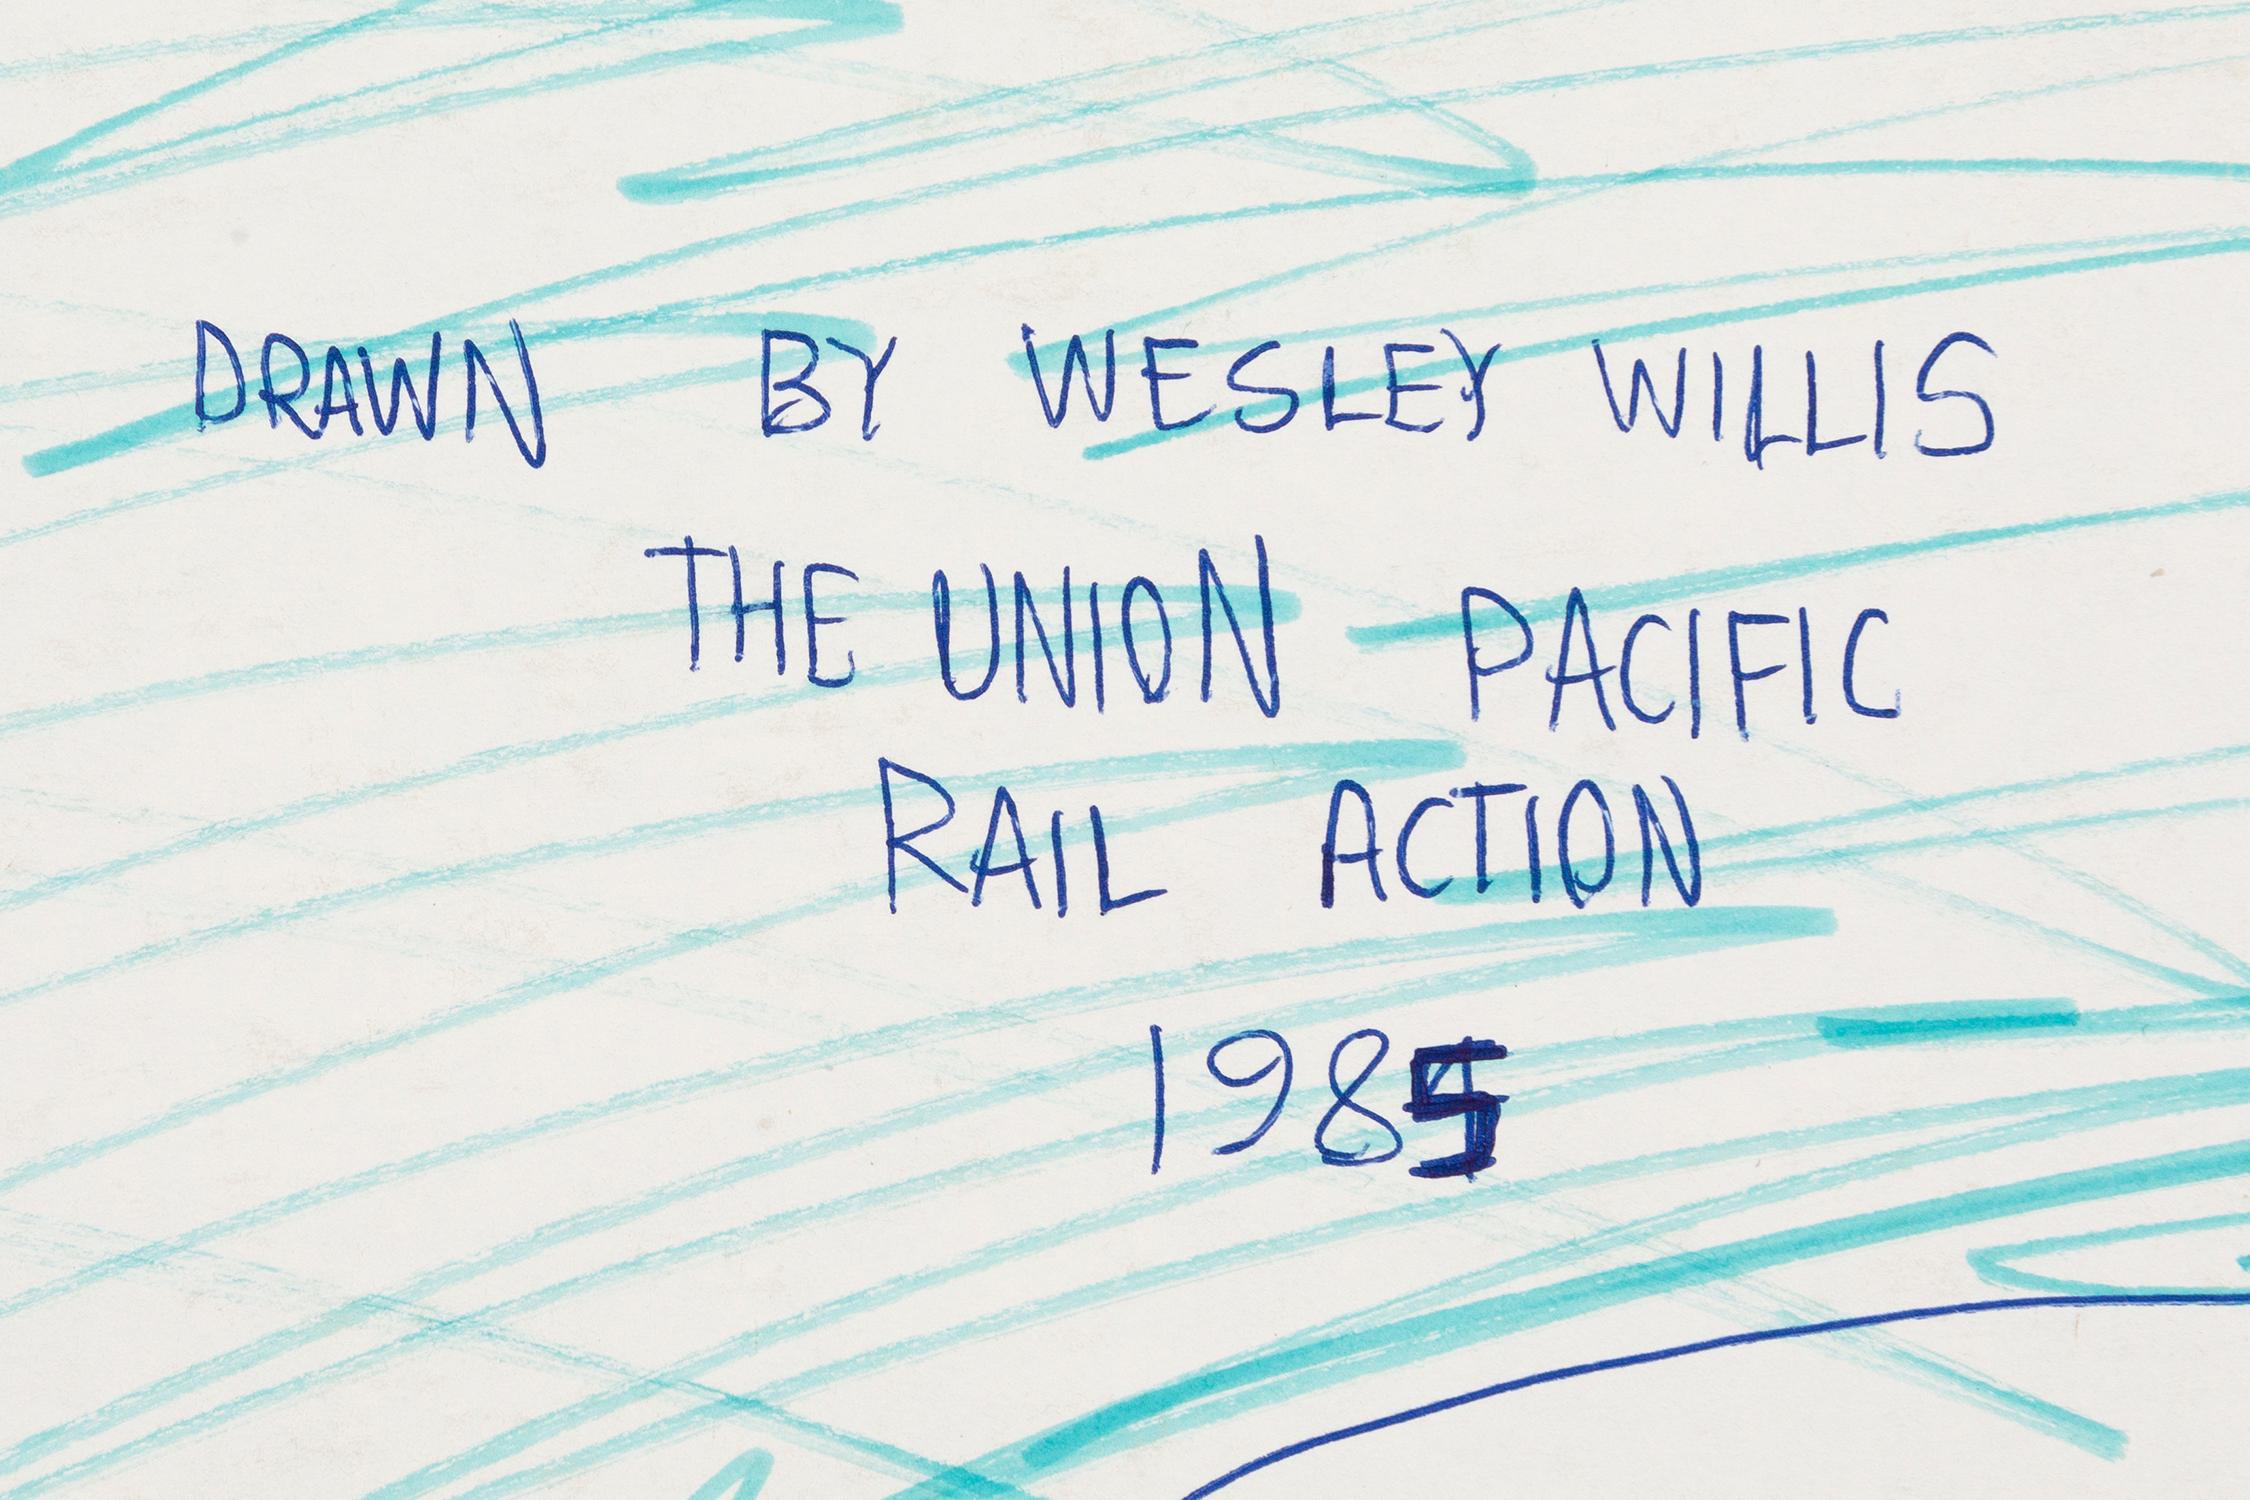 The Union Pacific Rail Action - Contemporary Art by Wesley Willis